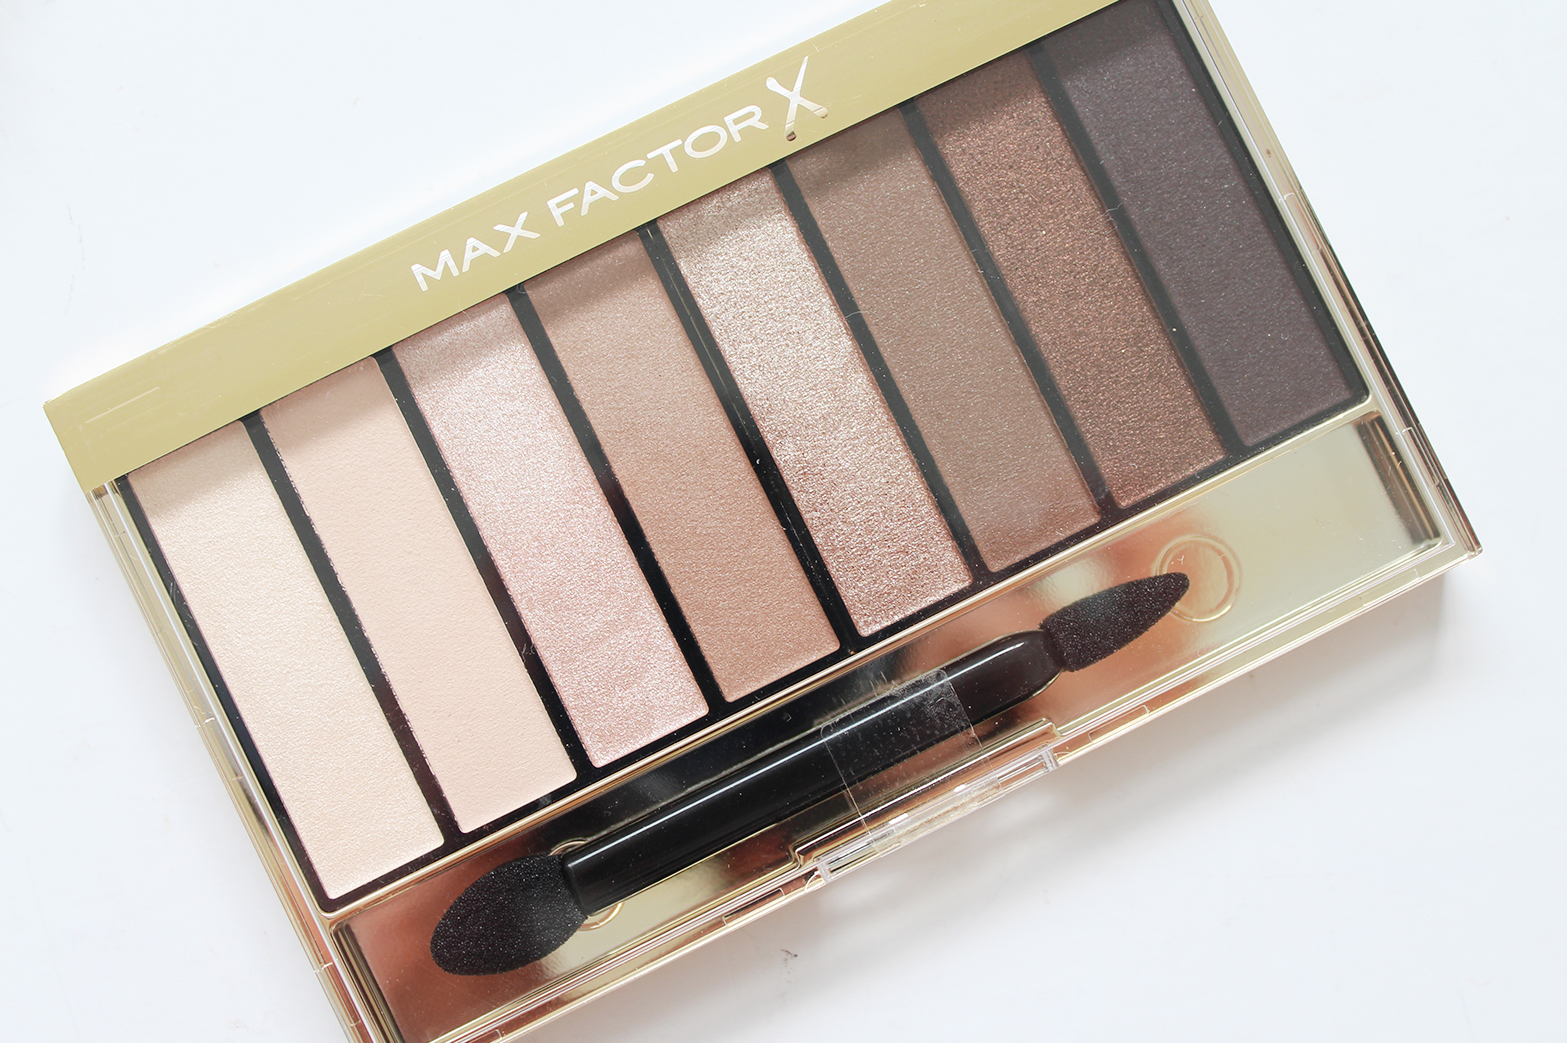 MAX FACTOR | Masterpiece Nudes Contouring Eyeshadow Palette in Cappuccino Nudes + Voluptuous Mascara - Review + Swatches - CassandraMyee